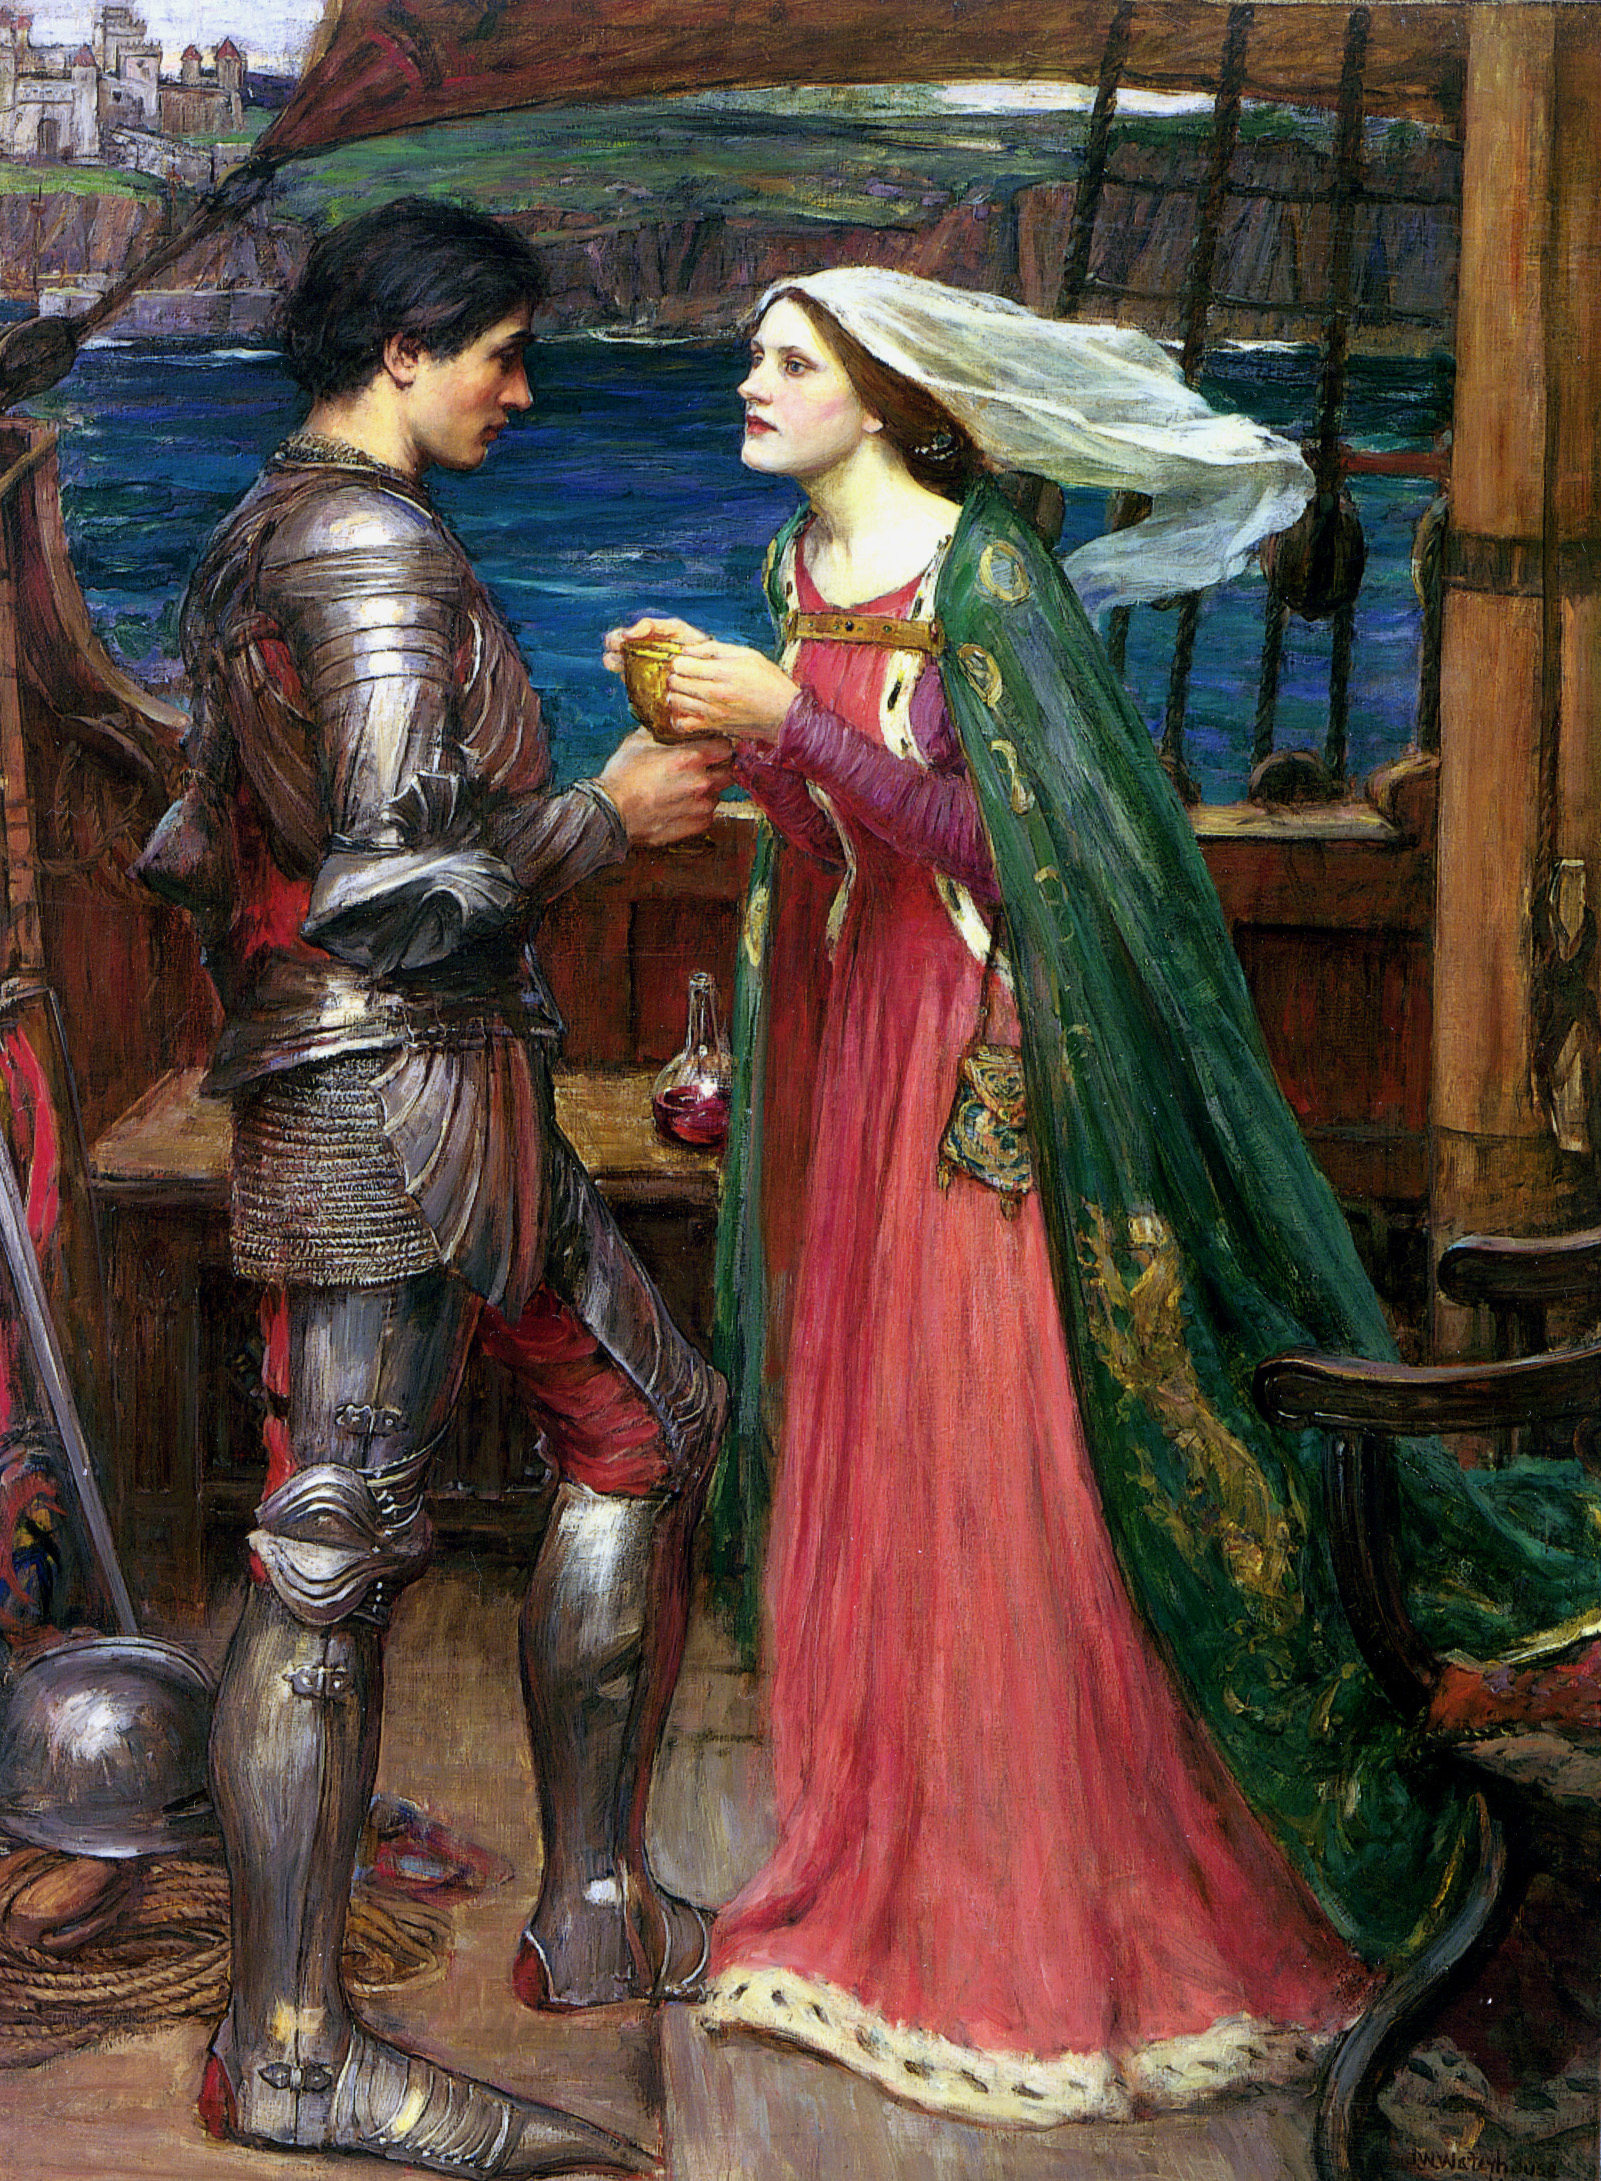 John_william_waterhouse_tristan_and_isolde_with_the_potion (1)